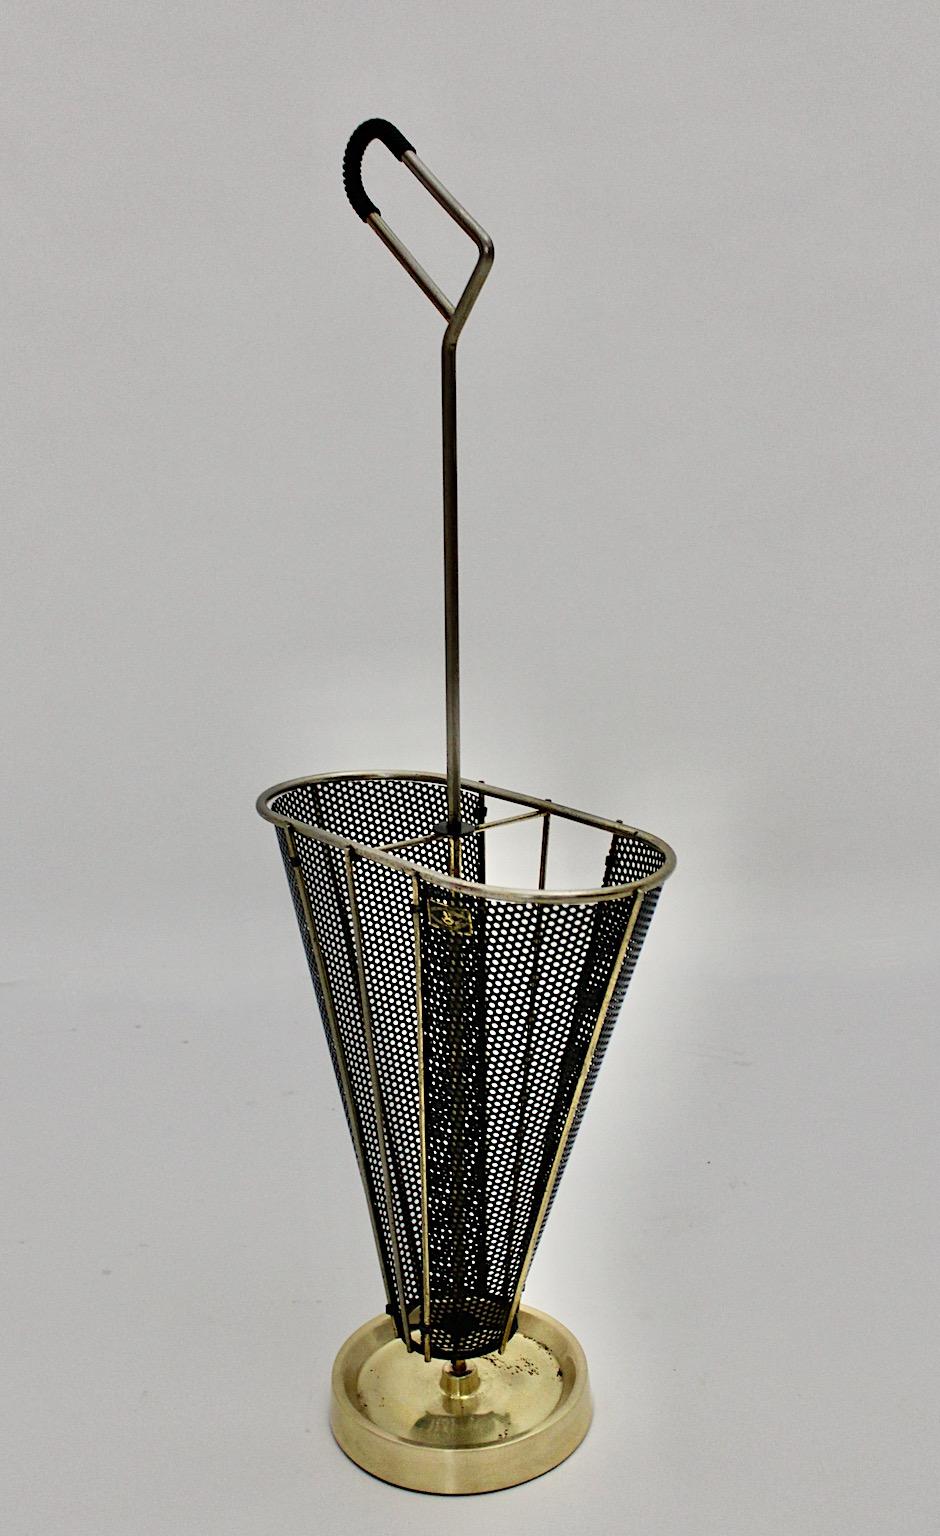 Mid-Century Modern vintage umbrella stand from black lacquered metal, brass and plastic, 1950s Germany.
A stunning umbrella stand in black and golden color tones from 1950s designed and manufactured in Germany.
While the conical shaped body shows